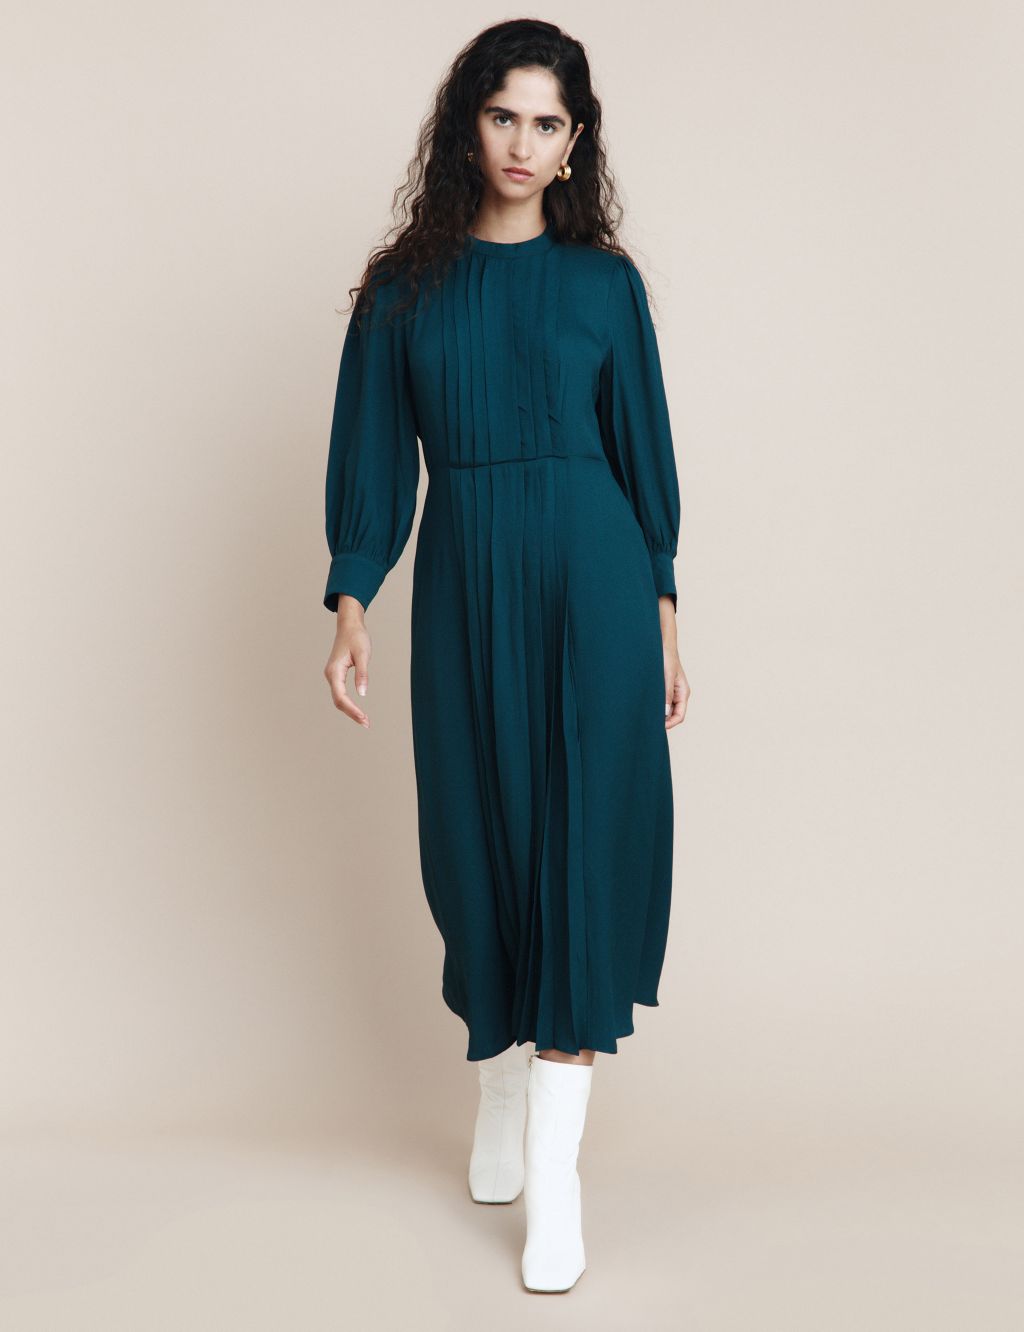 Crepe High Neck Pleated Midaxi Swing Dress image 1